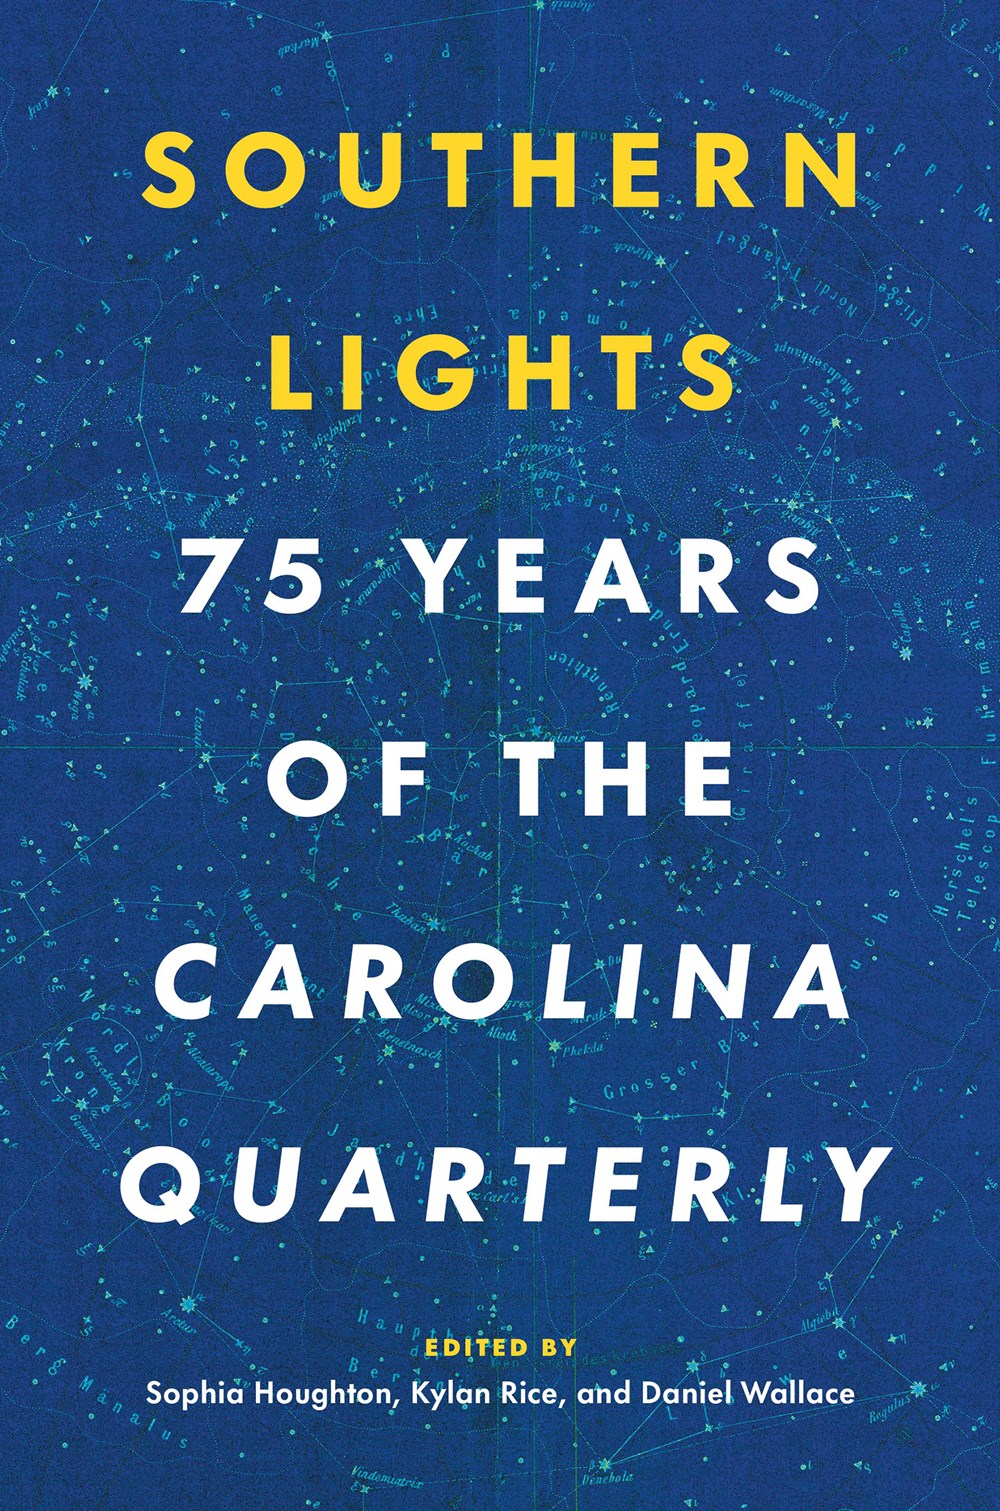 Southern Lights: 75 Years of the Carolina Quarterly